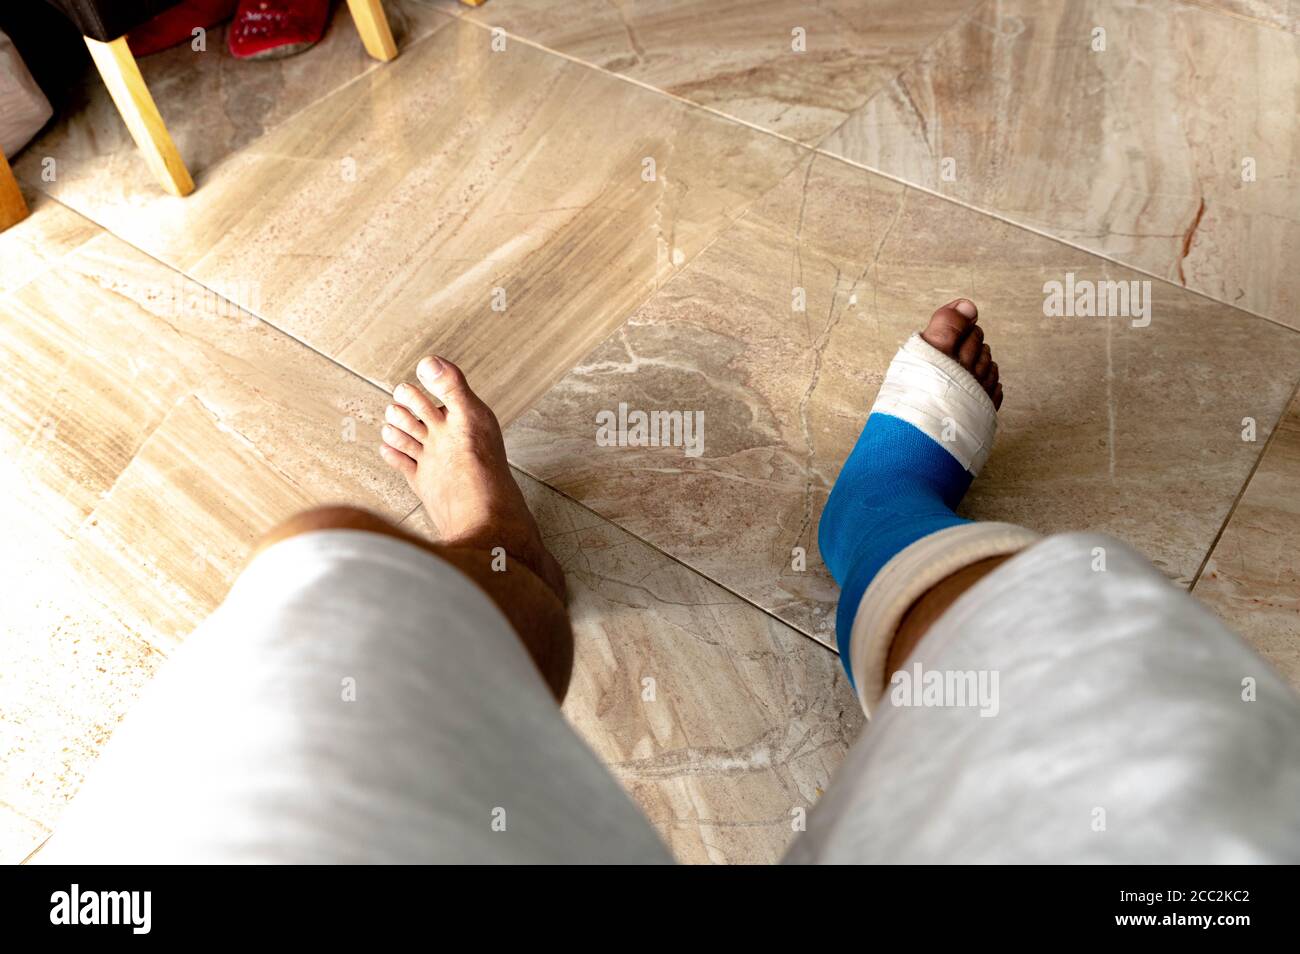 Man in cast after surgery on foot sat on chair Stock Photo